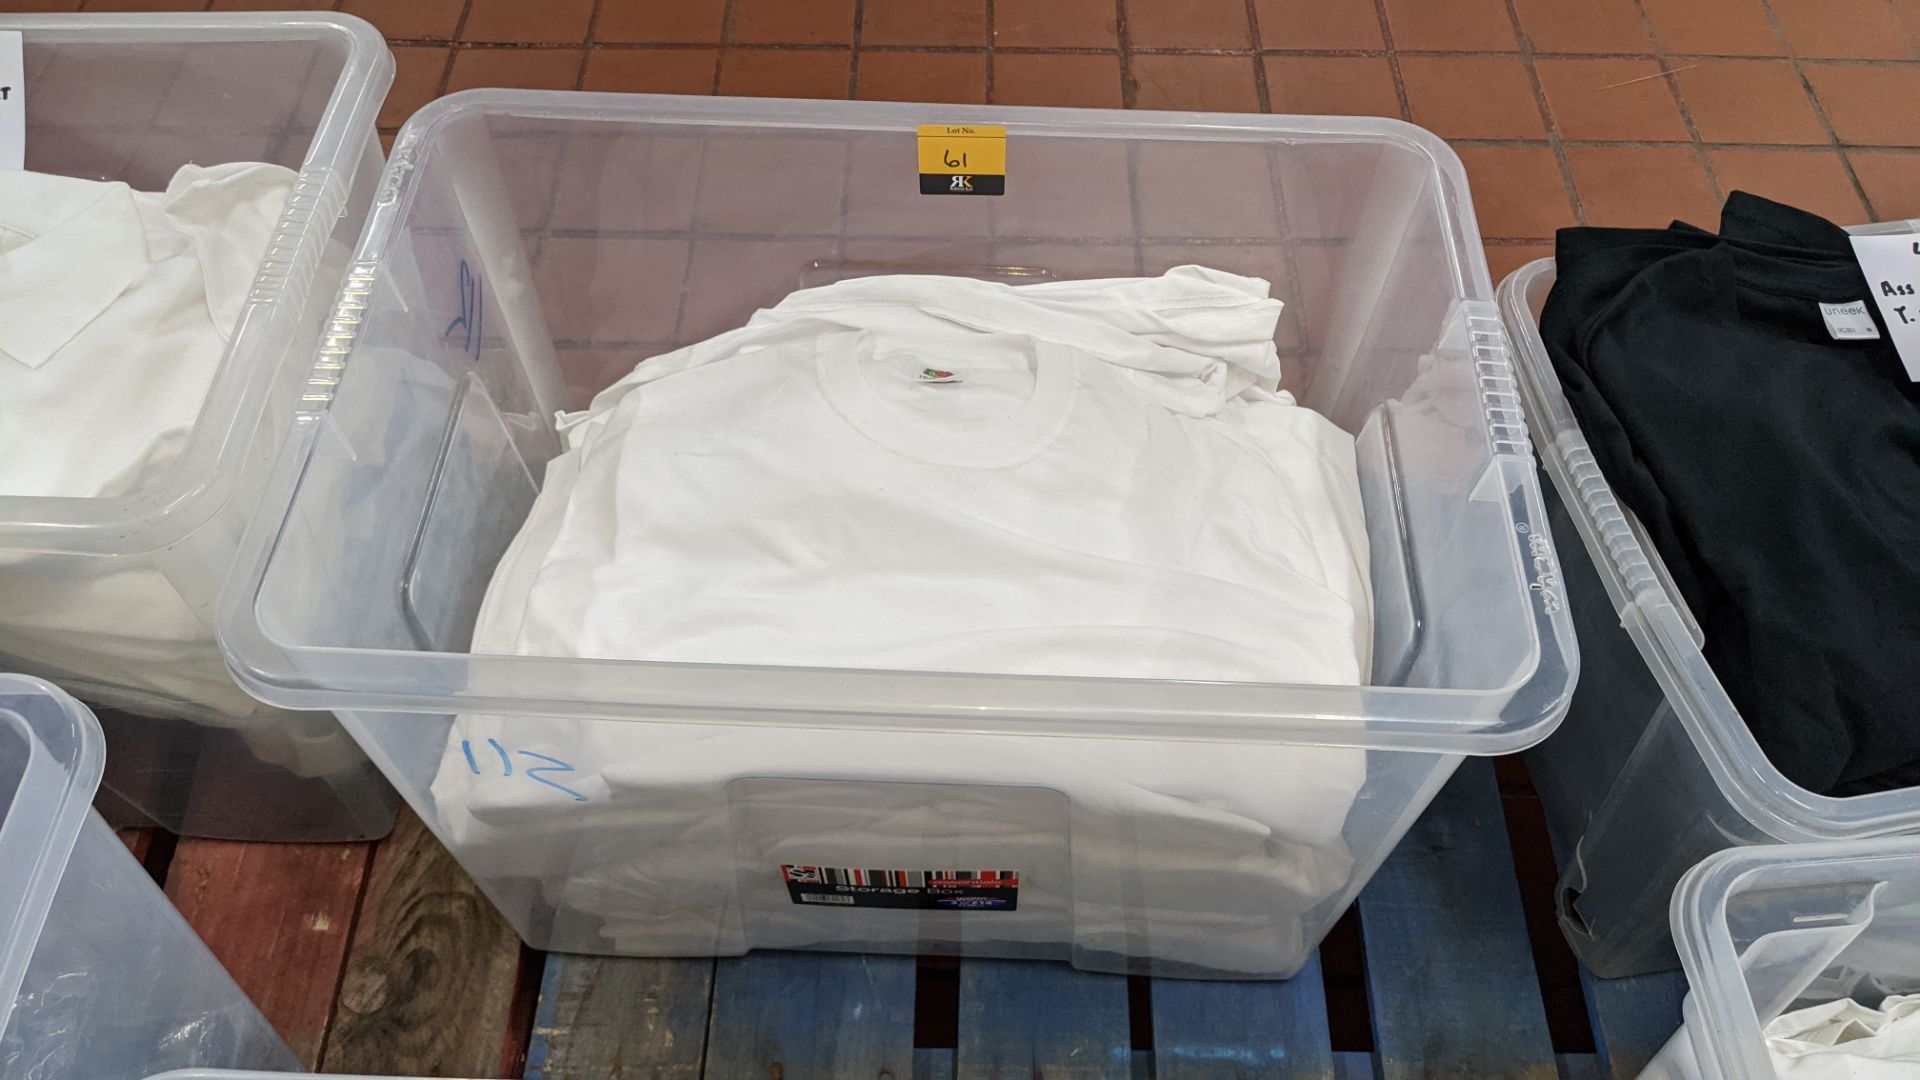 50 off Fruit of the Loom white T-shirts - crate excluded